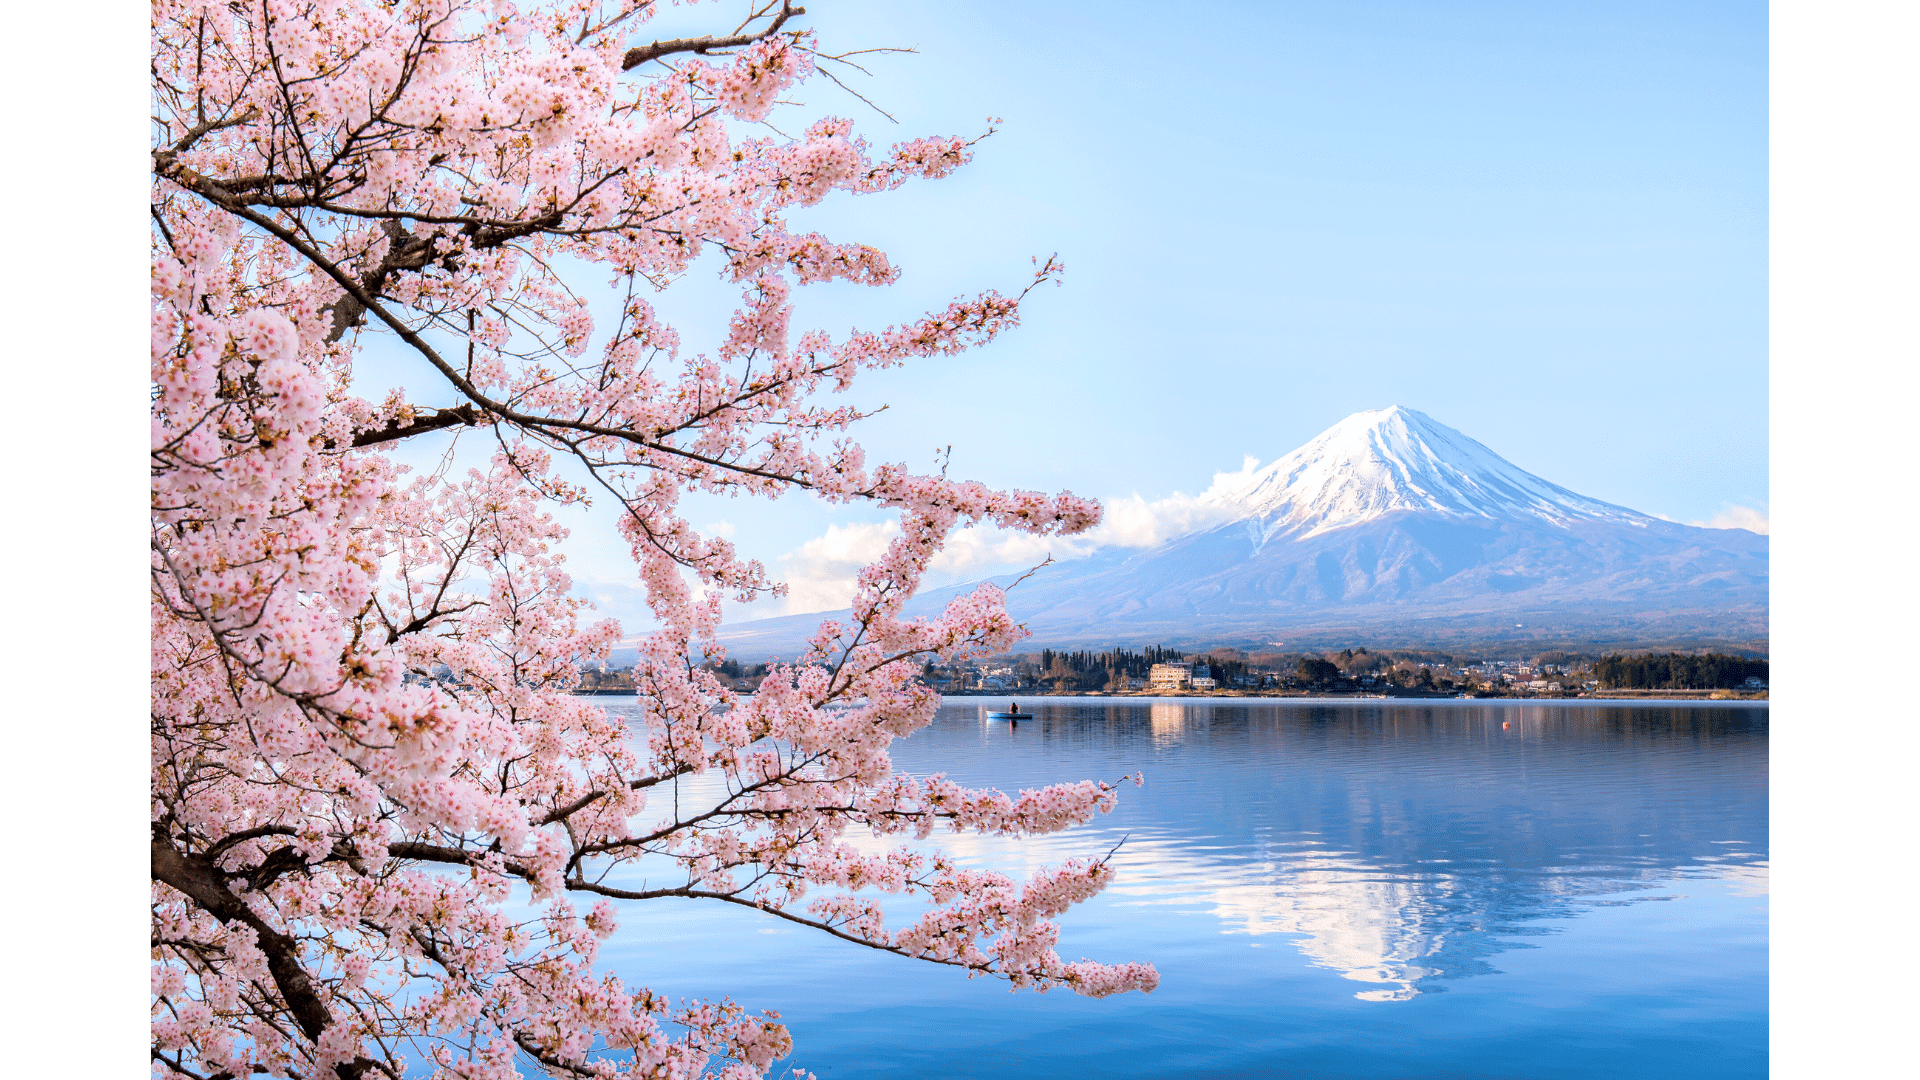 Mount Fuji as viewed from Fuji Five Lakes region with cherry blossoms in the foreground.